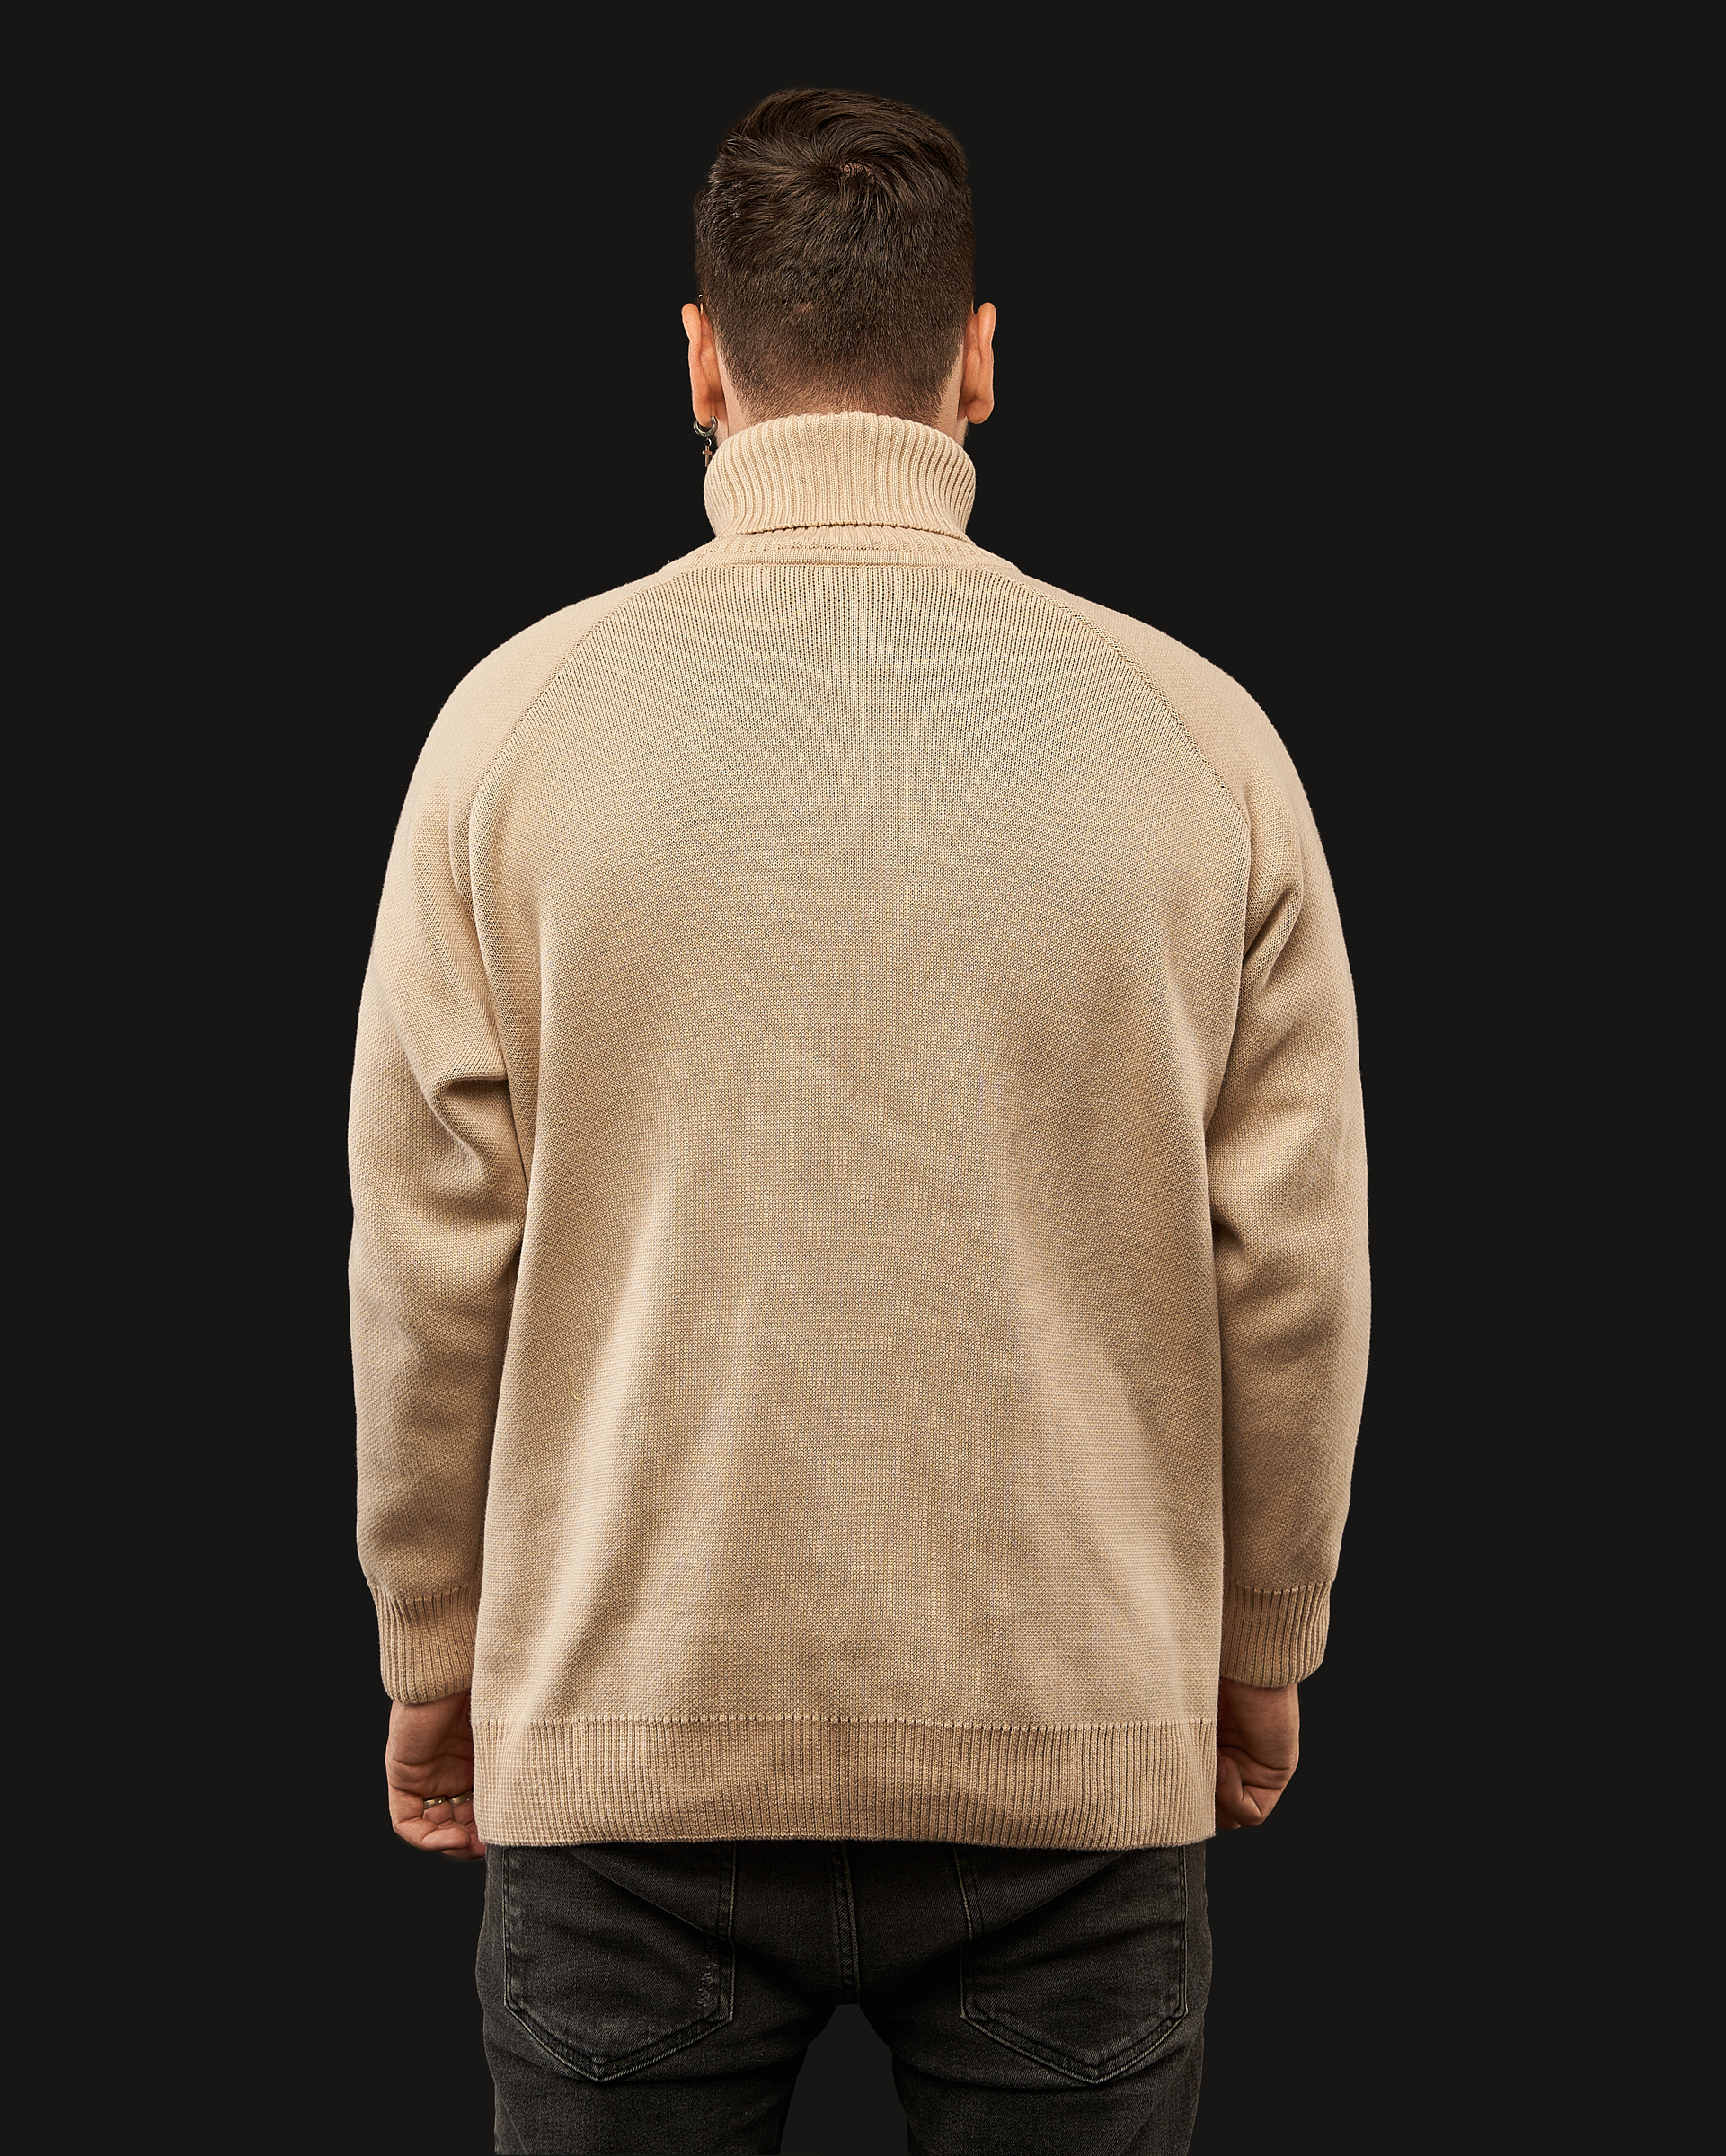 Sweter (beżowy) Image: https://ohueno-official.com/wp-content/uploads/m01950-1.jpg